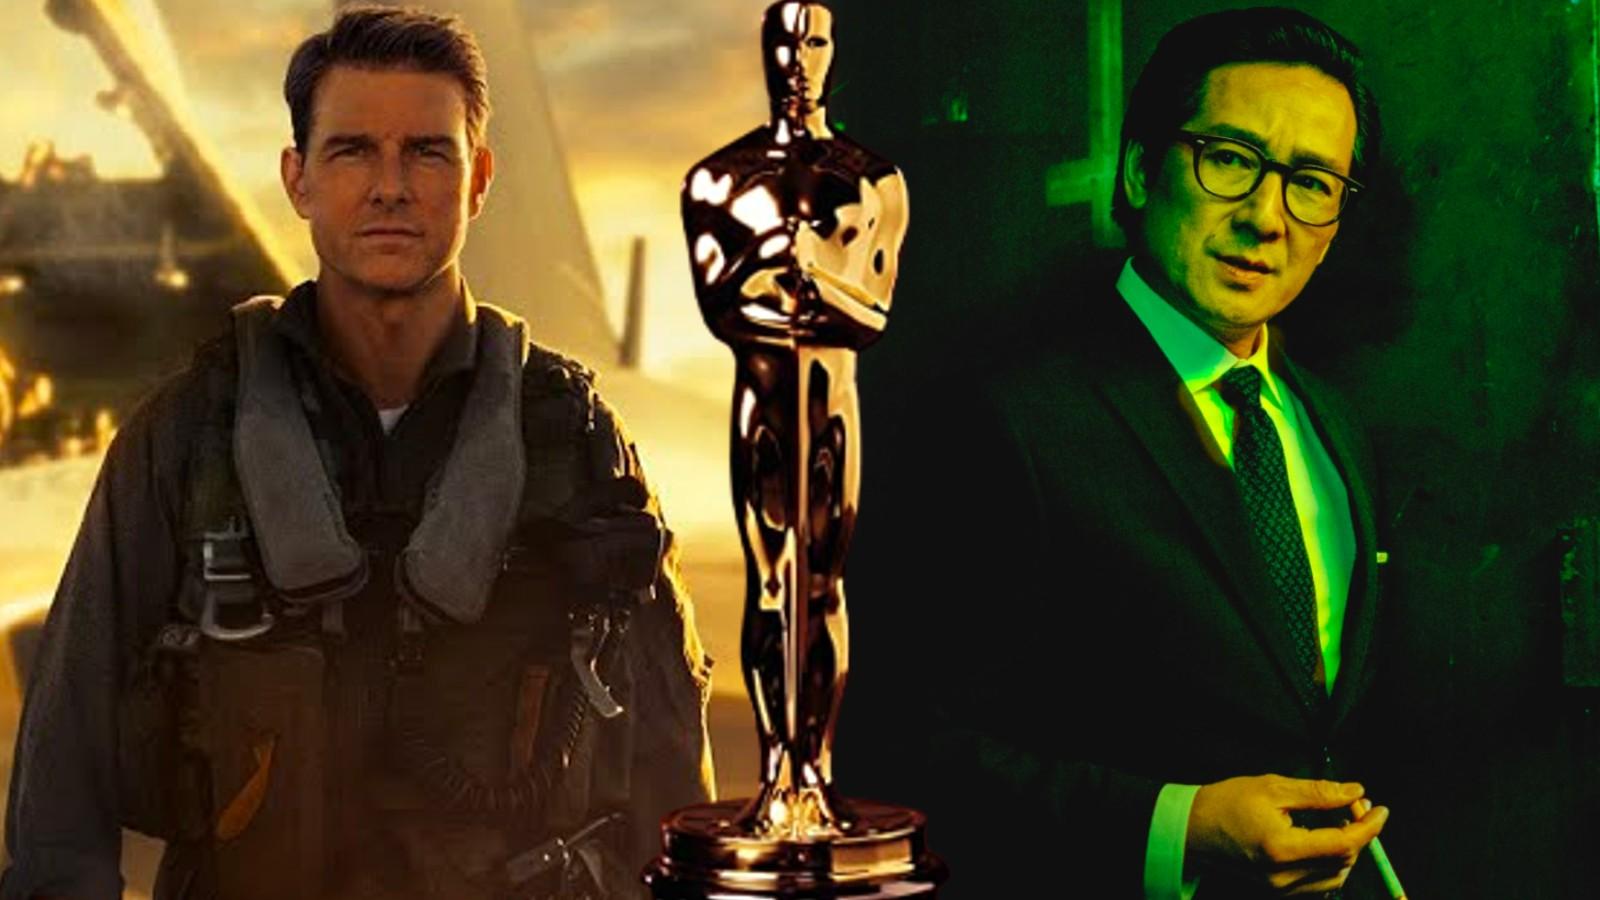 Stills from Top Gun Maverick and Everything Everywhere All at Once, two movies set to be nominated for Oscars